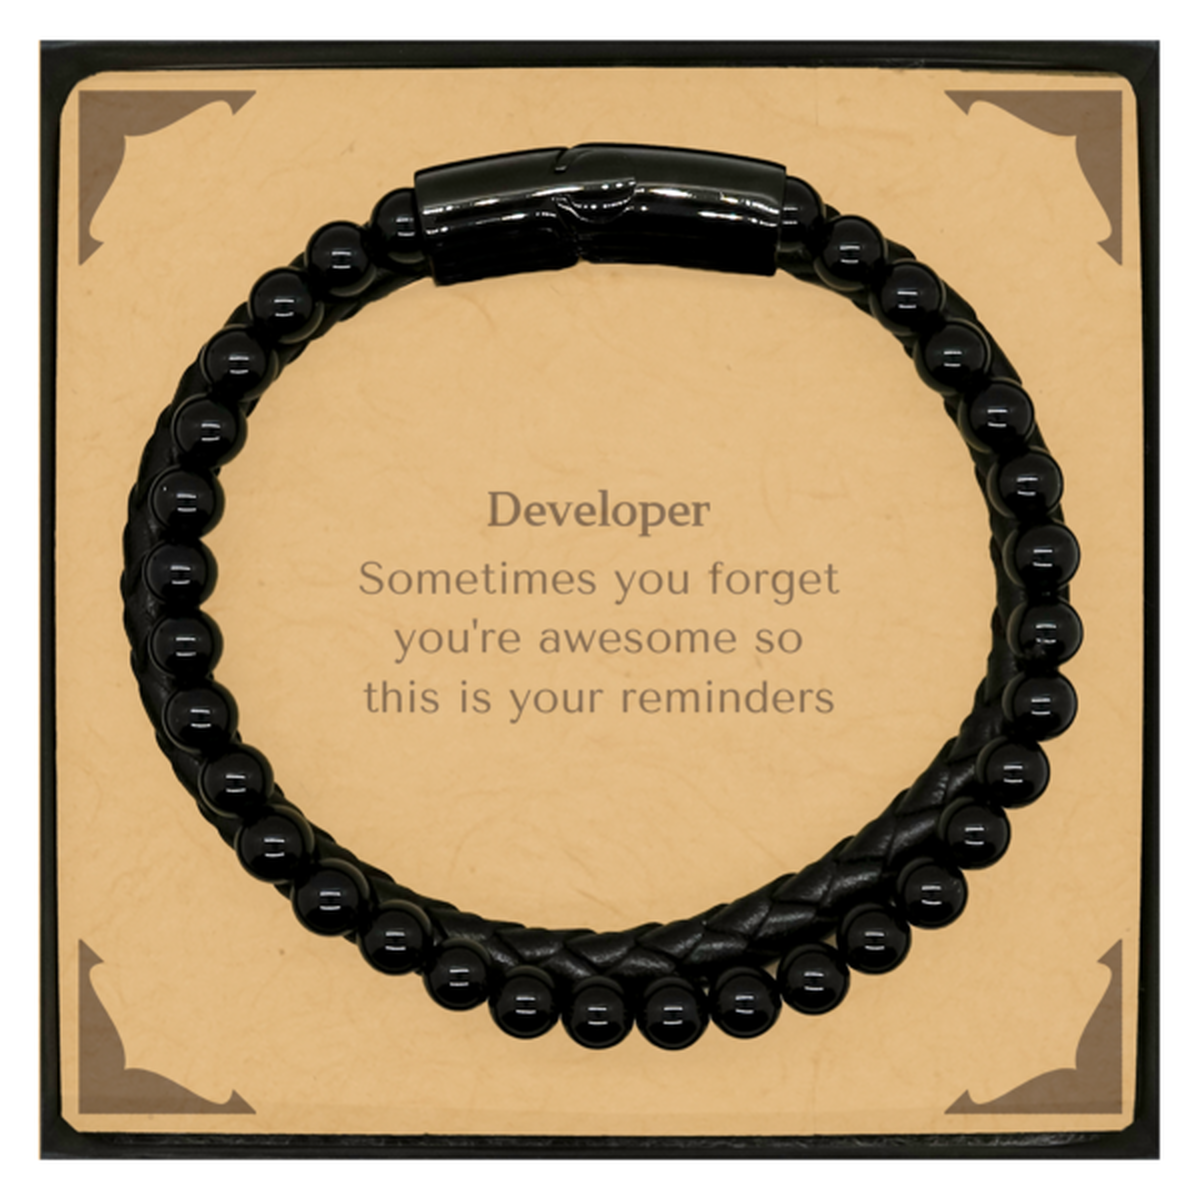 Sentimental Developer Stone Leather Bracelets, Developer Sometimes you forget you're awesome so this is your reminders, Graduation Christmas Birthday Gifts for Developer, Men, Women, Coworkers